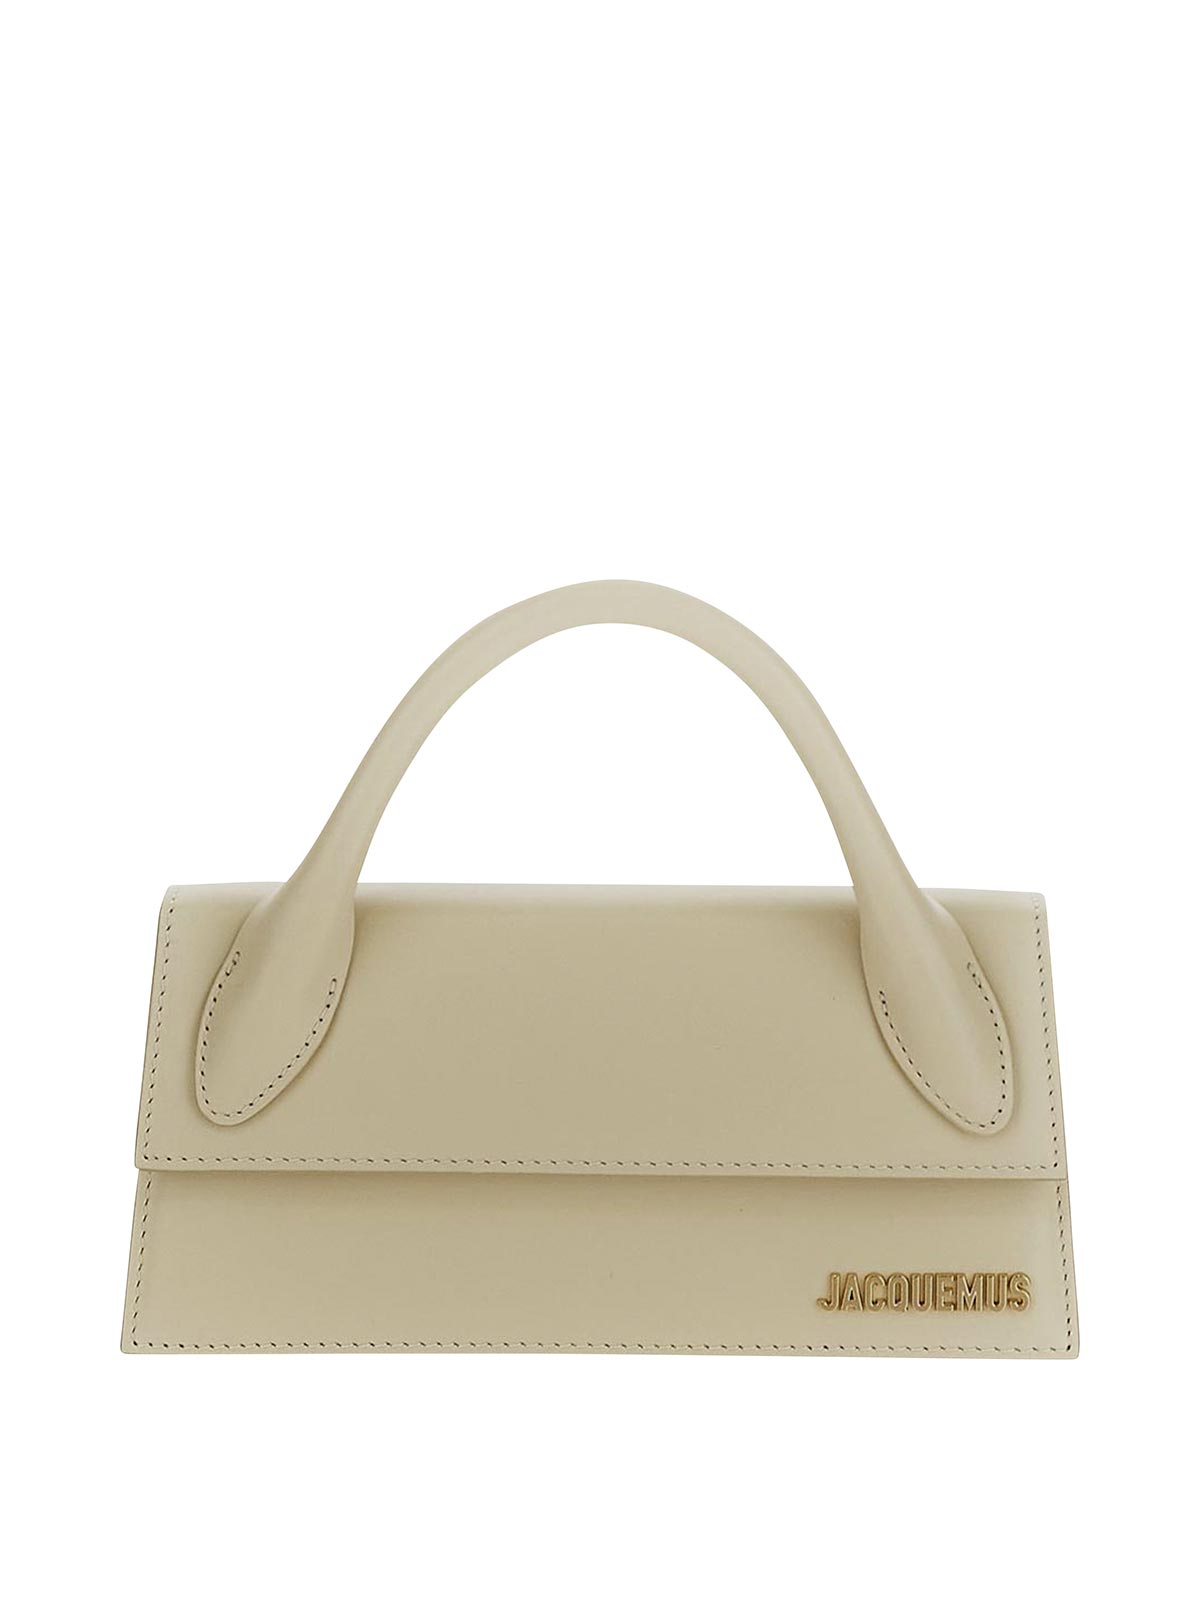 Jacquemus Handbag In Ivory With Reinforced Top In Brown